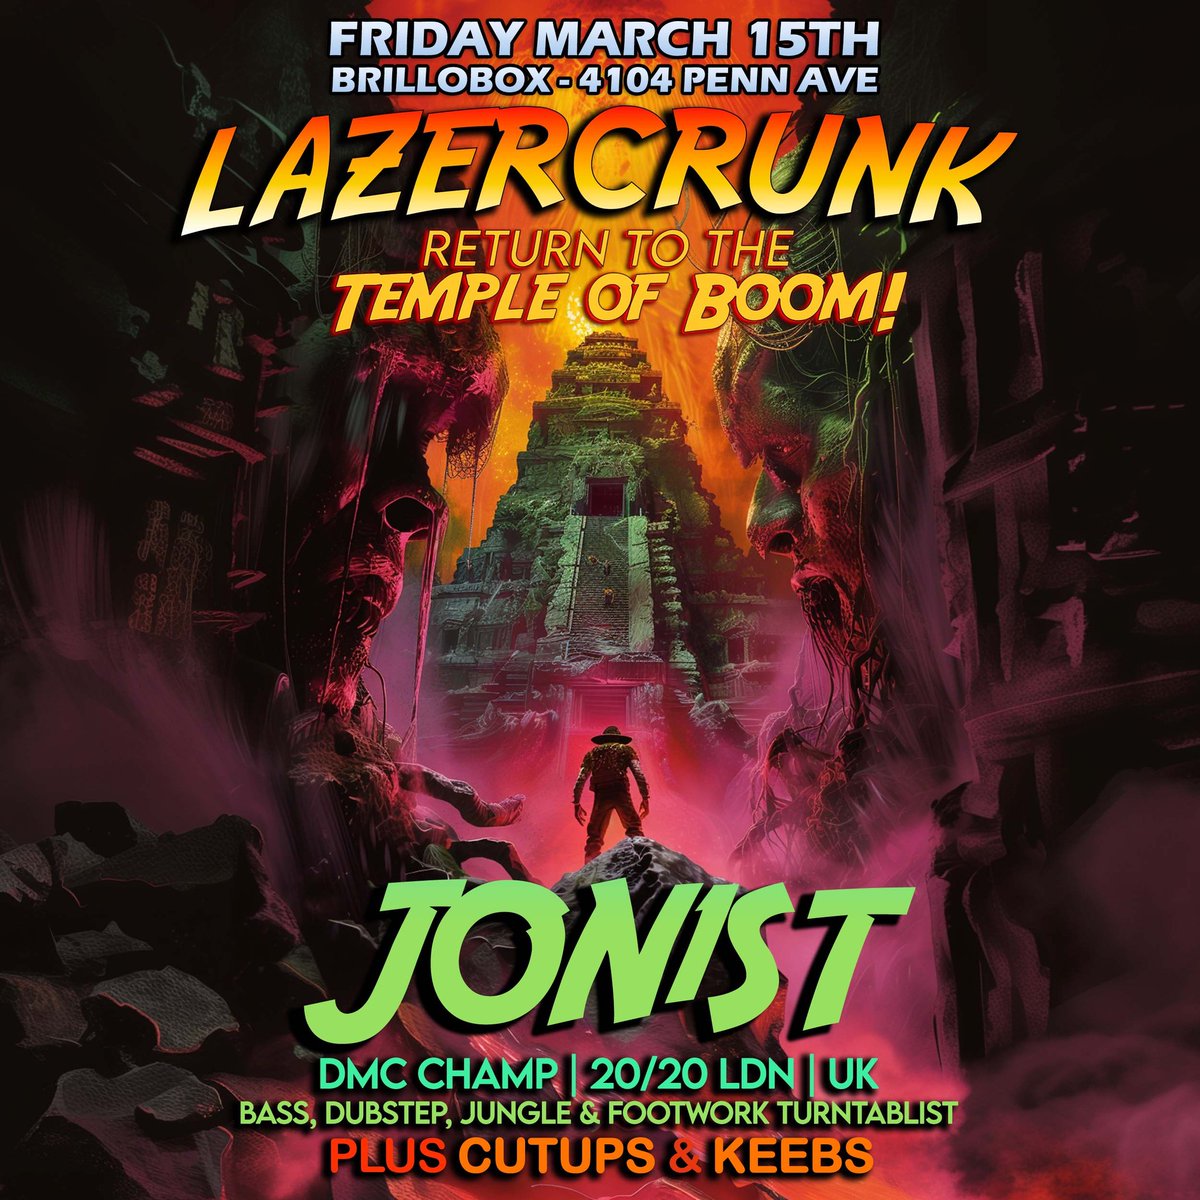 I'm in Pittsburgh tonight for Lazercrunk!